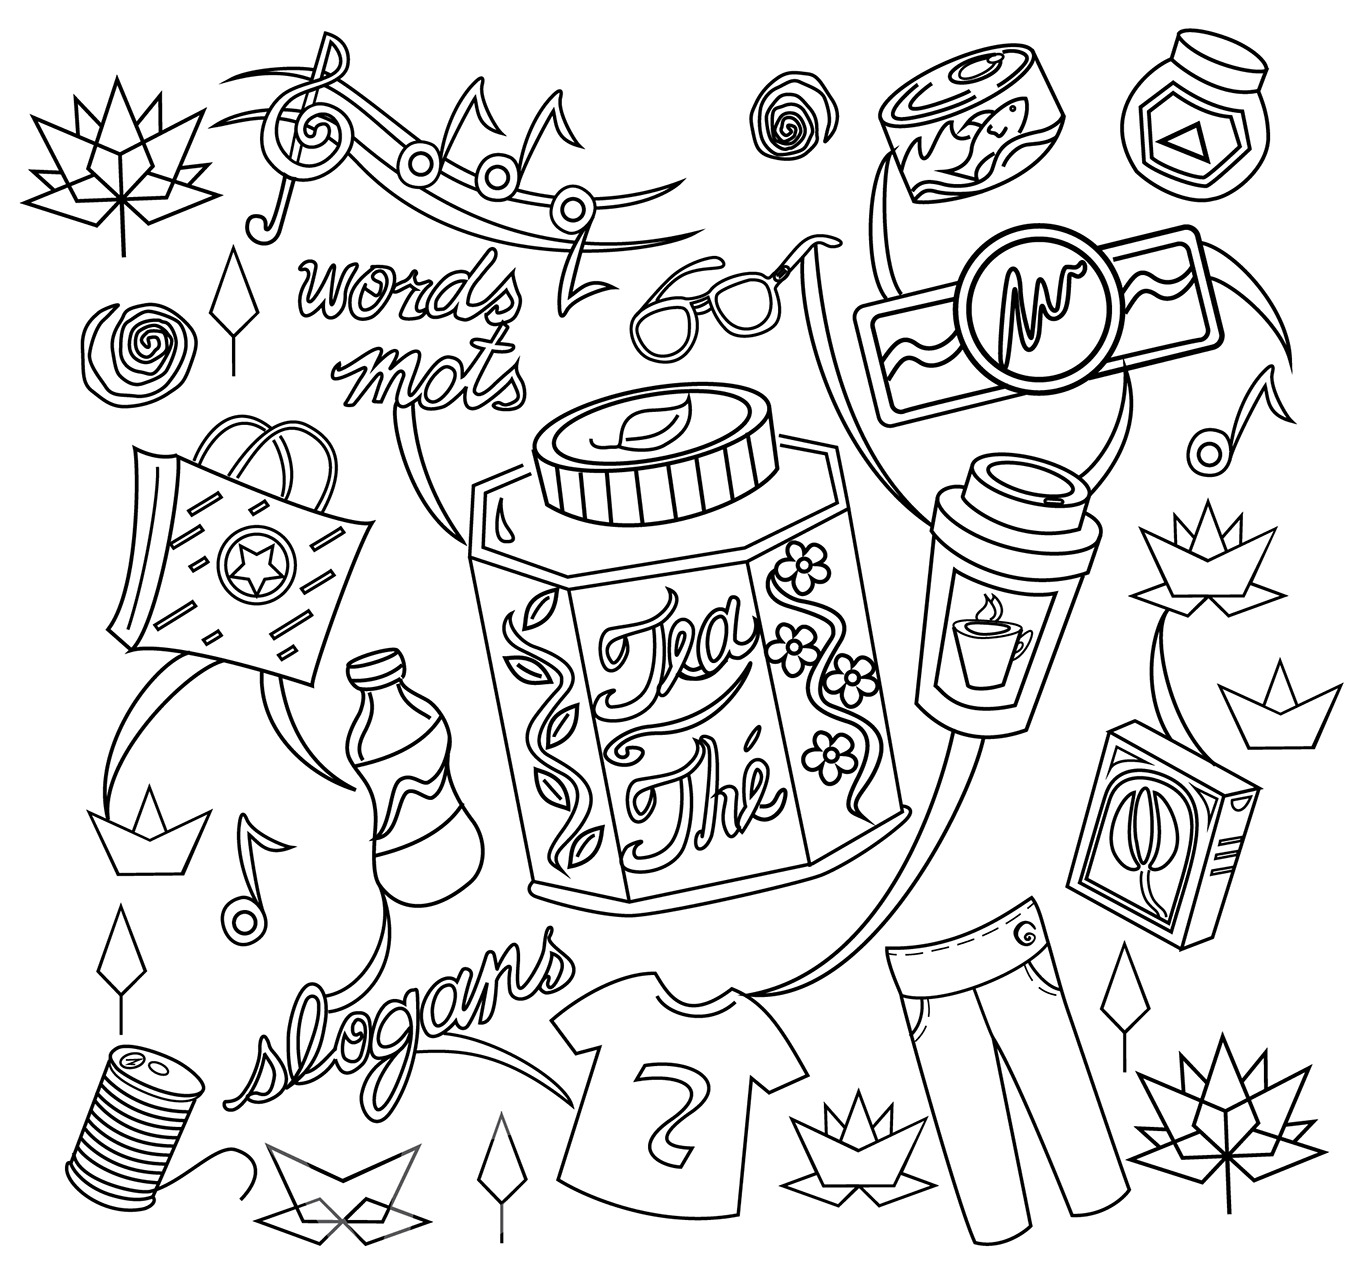 Colouring page featuring sample items that could be trademarked and a description of trademarks.